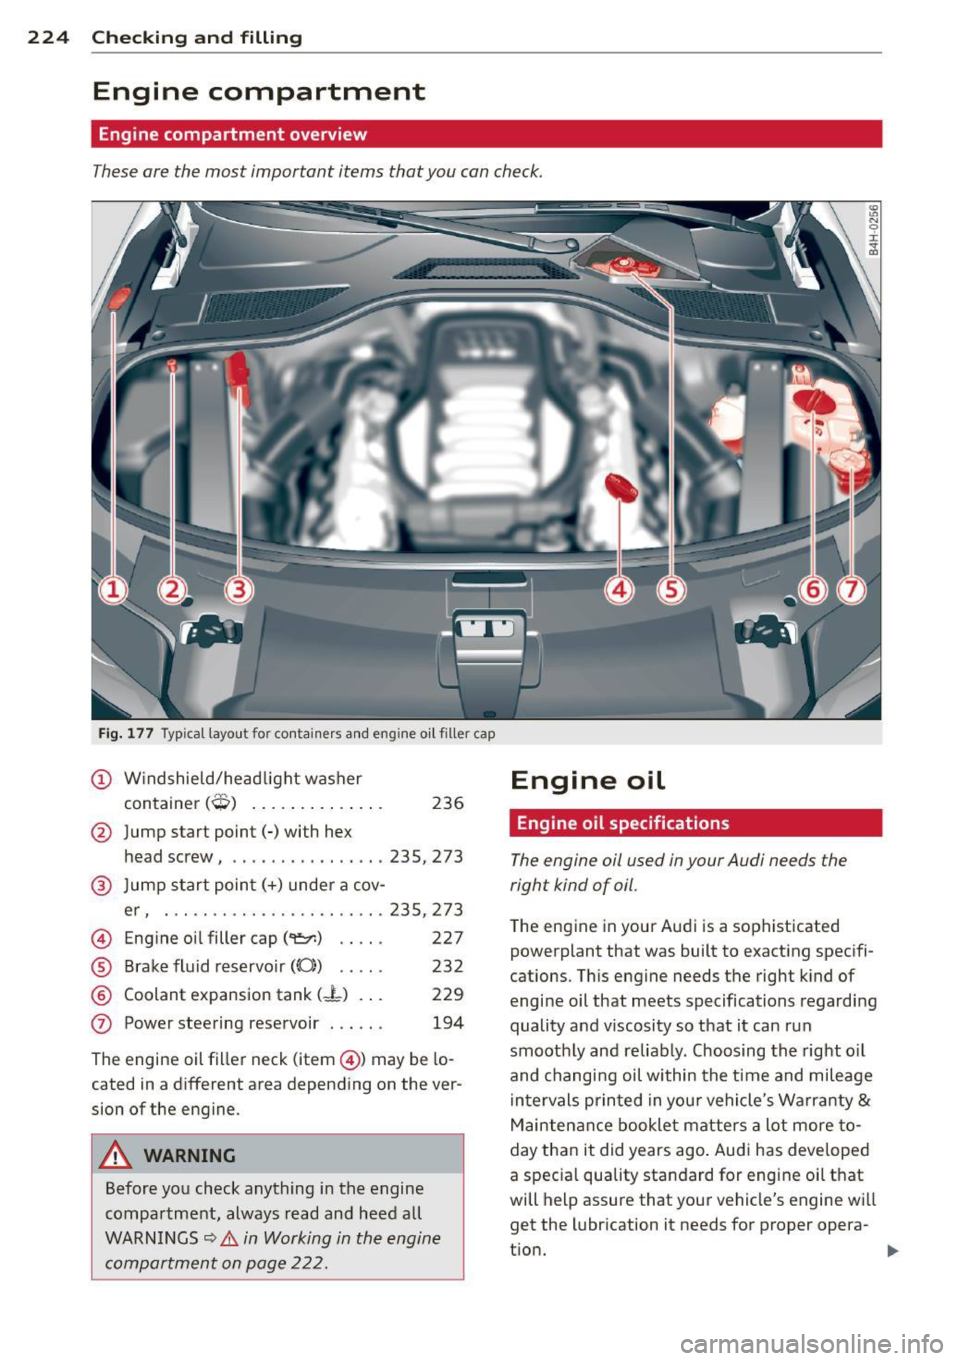 AUDI A8 2011  Owners Manual 224  Checking  and  filling 
Engine  compartment 
Engine compartment  overview 
These are the  most  important  items  that you  can check. 
Fig . 177  Typ ical  layout  for  conta iners  a nd eng ine